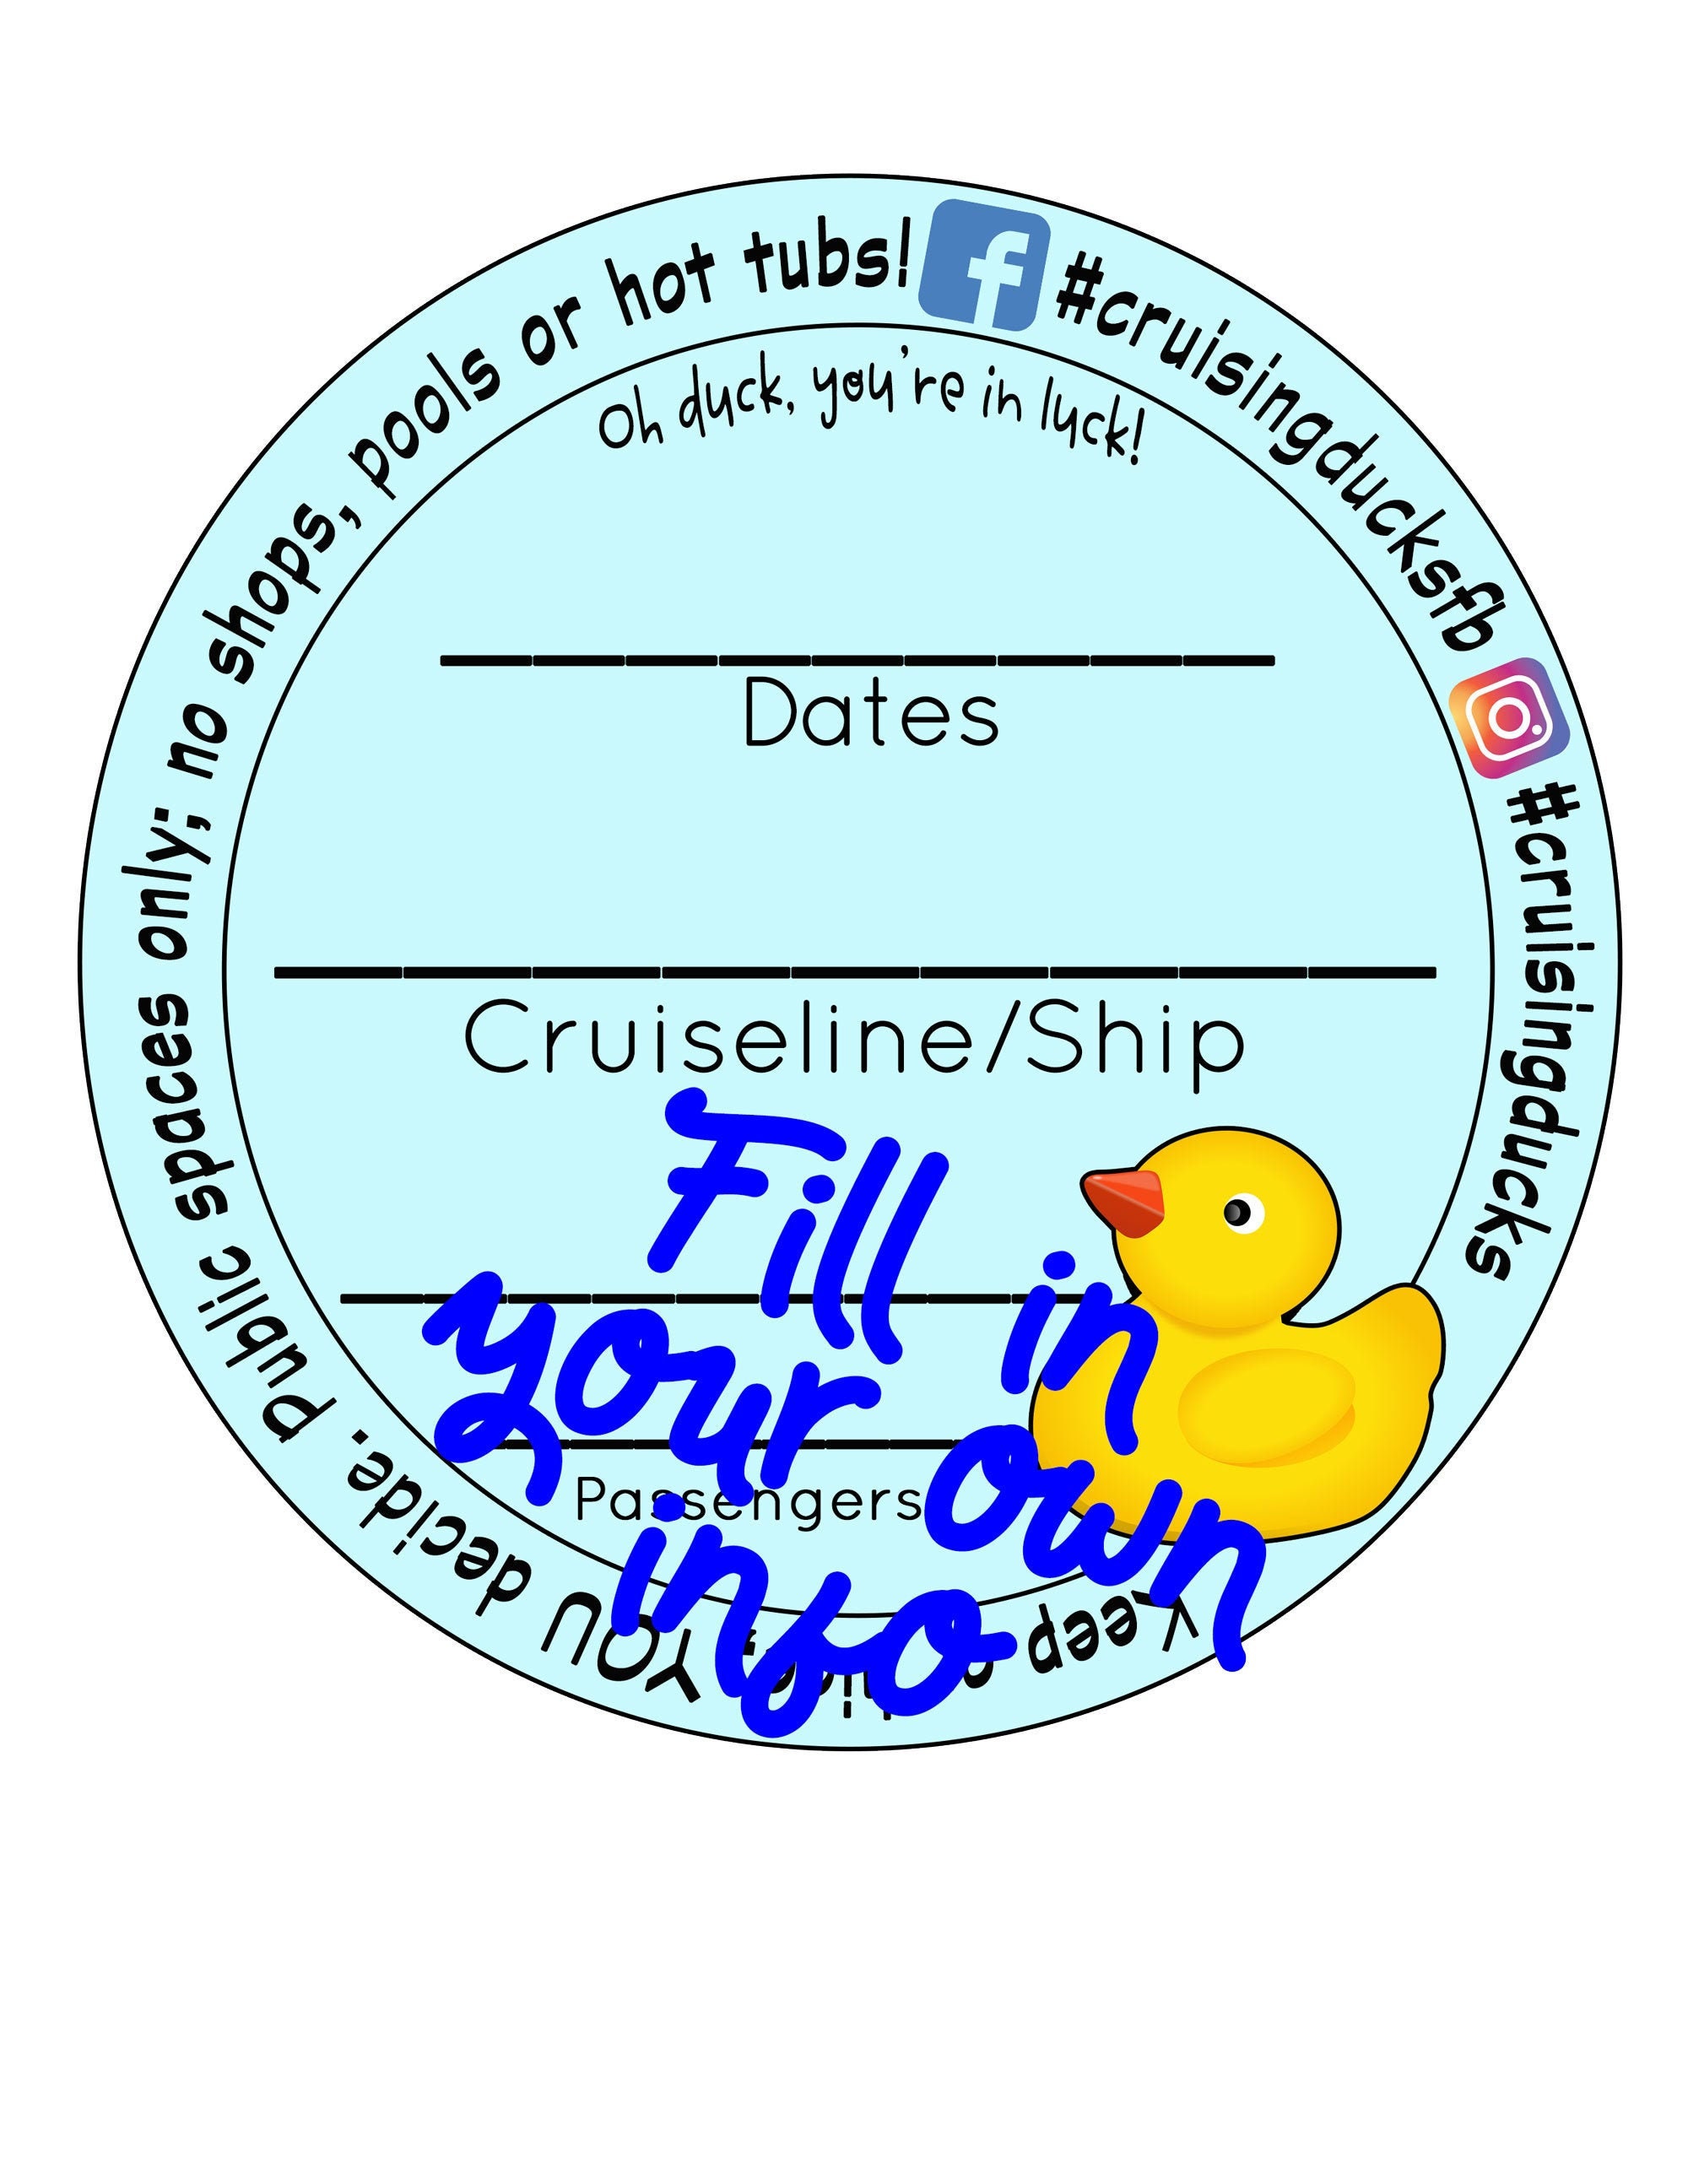 2-inch-cruising-ducks-sticker-download-fill-in-the-blanks-etsy